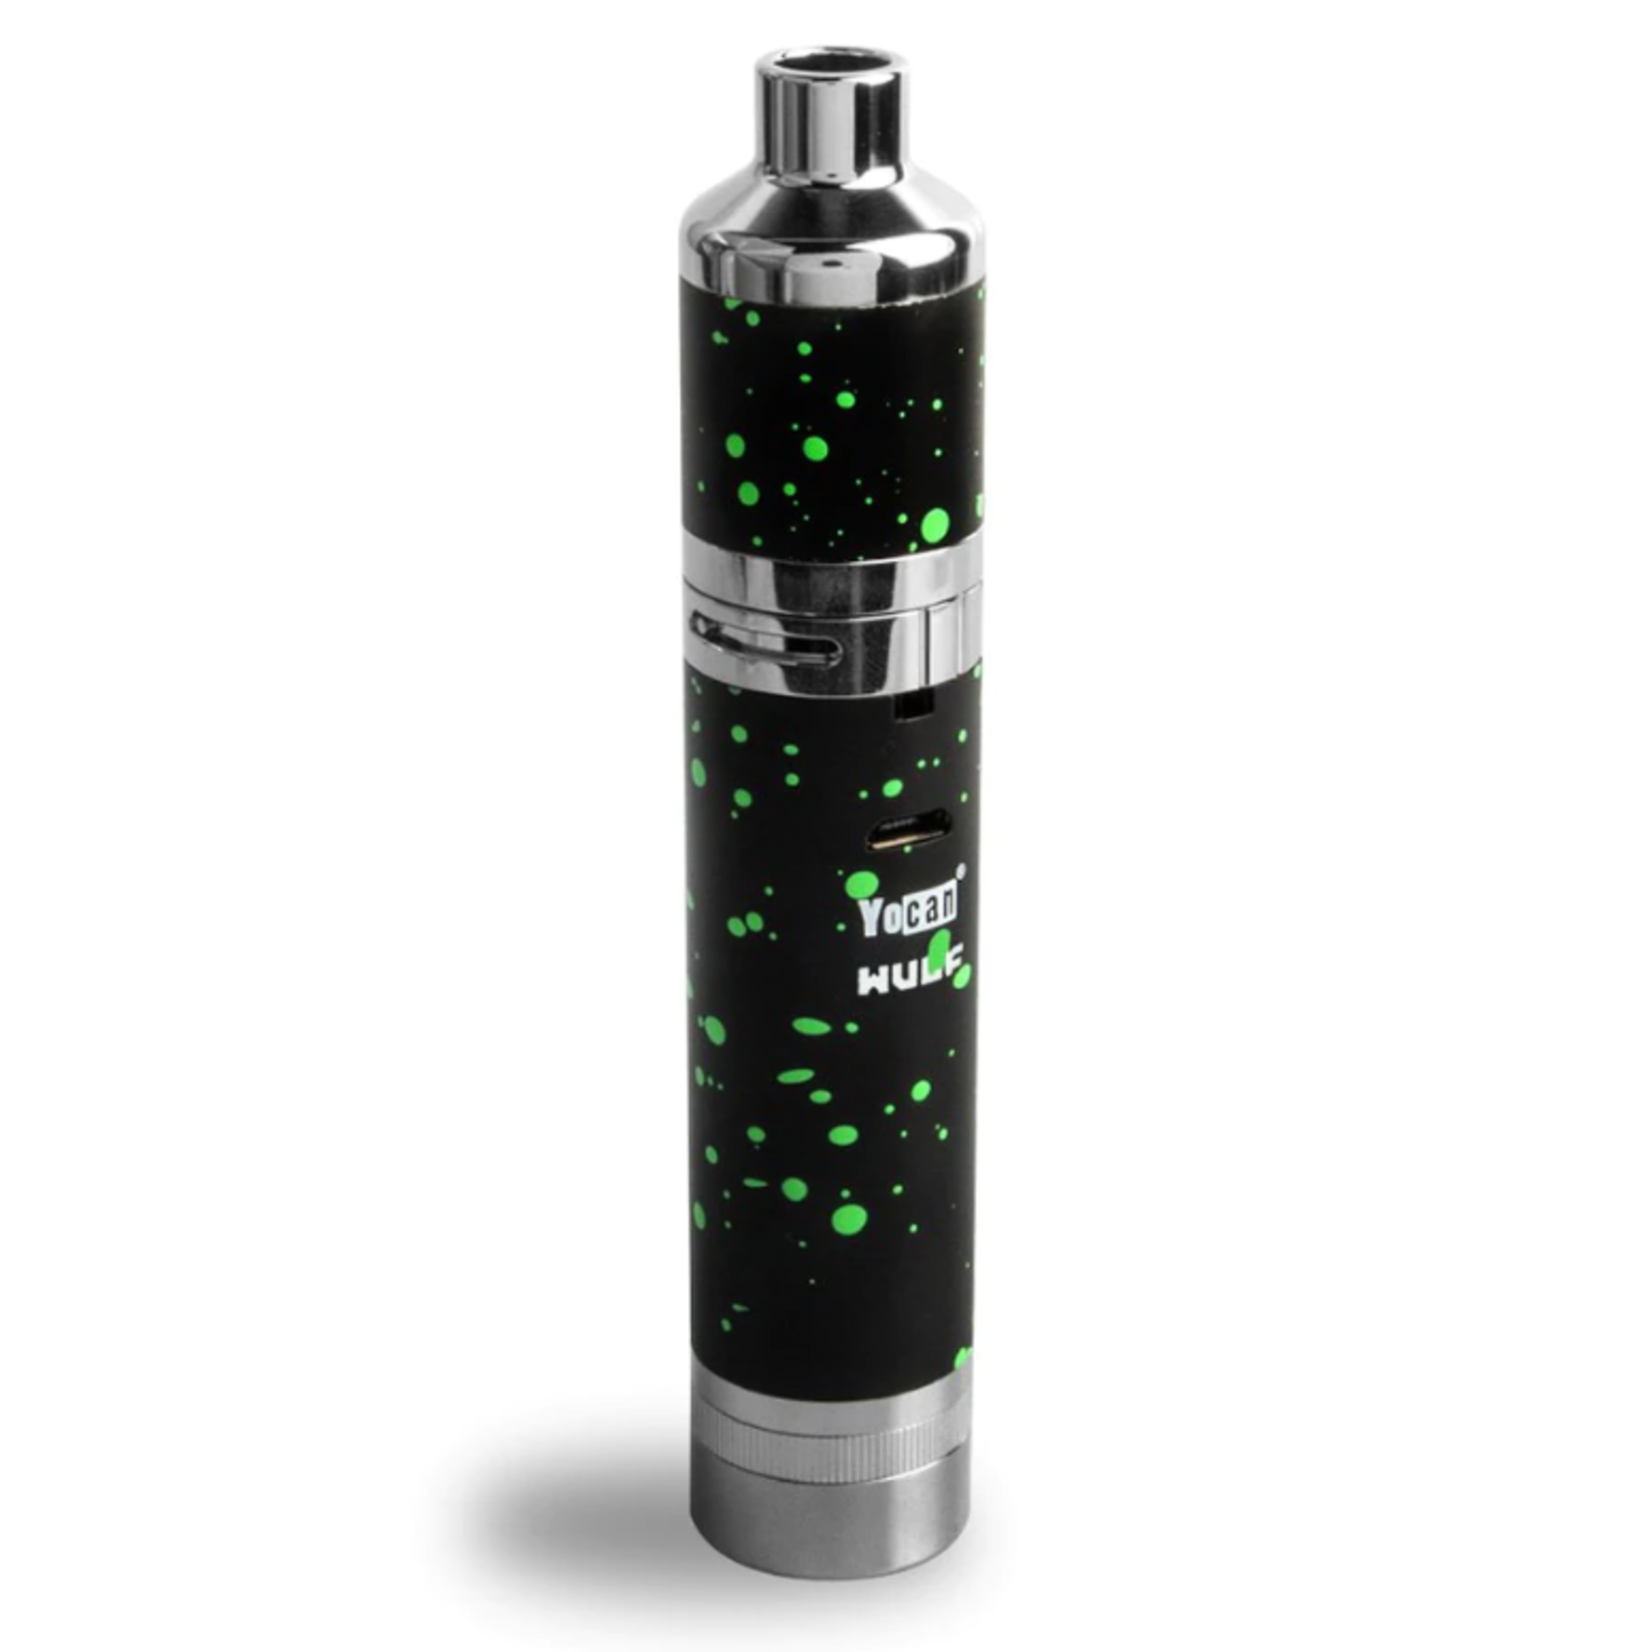 Yocan Yocan Evolve Plus XL (Wulf SE) Herbal Concentrate Vaporizer - Black w/ Green Spatter